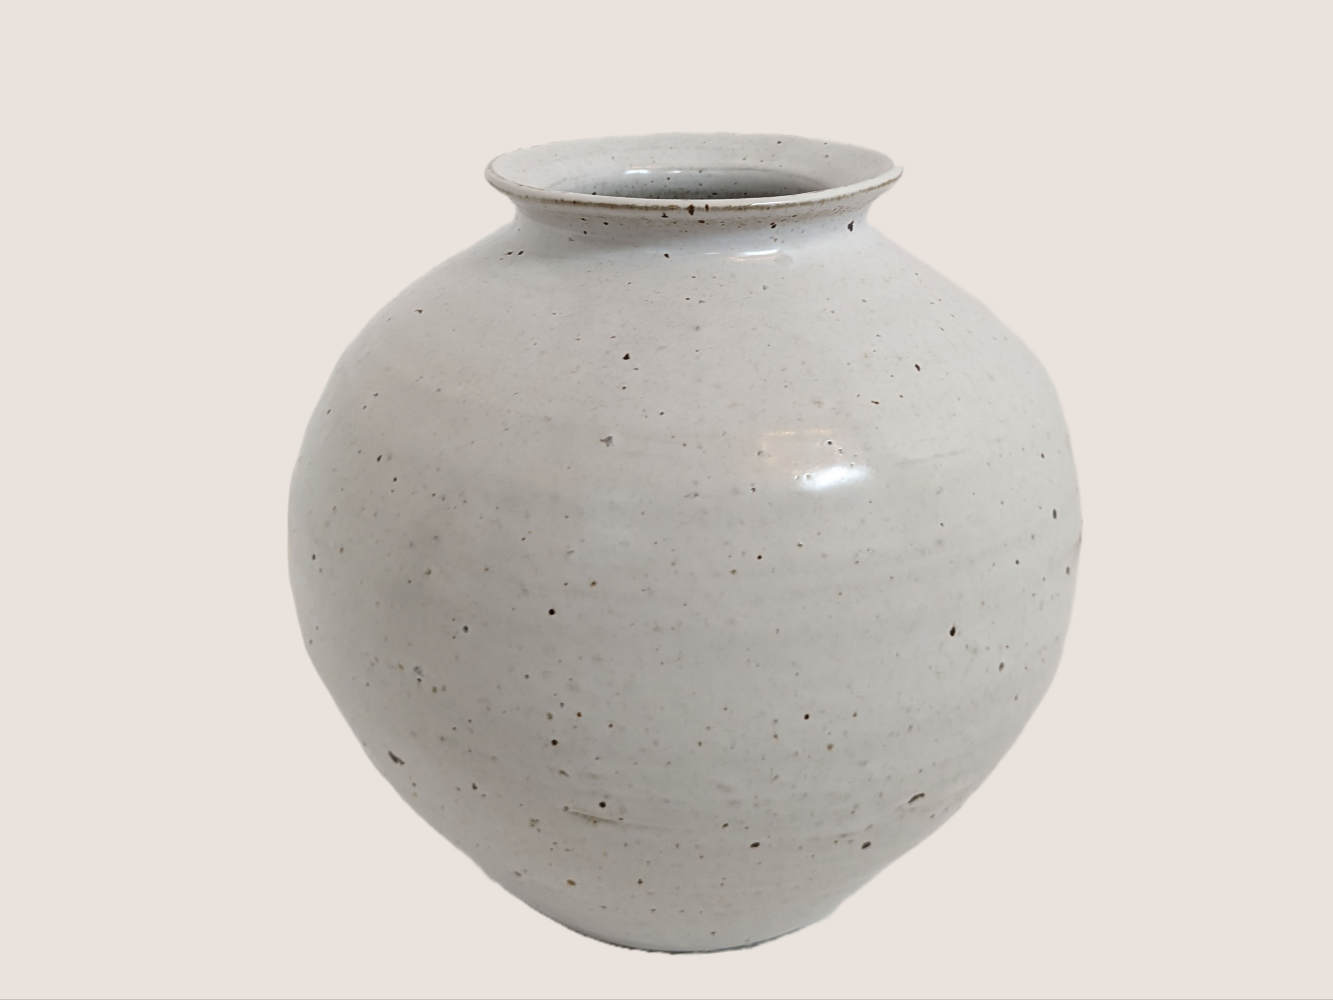 Ivory ceramic vase in round shape with 3.5 inch vase opening. Brown and black speckles give it natural texture and look. 